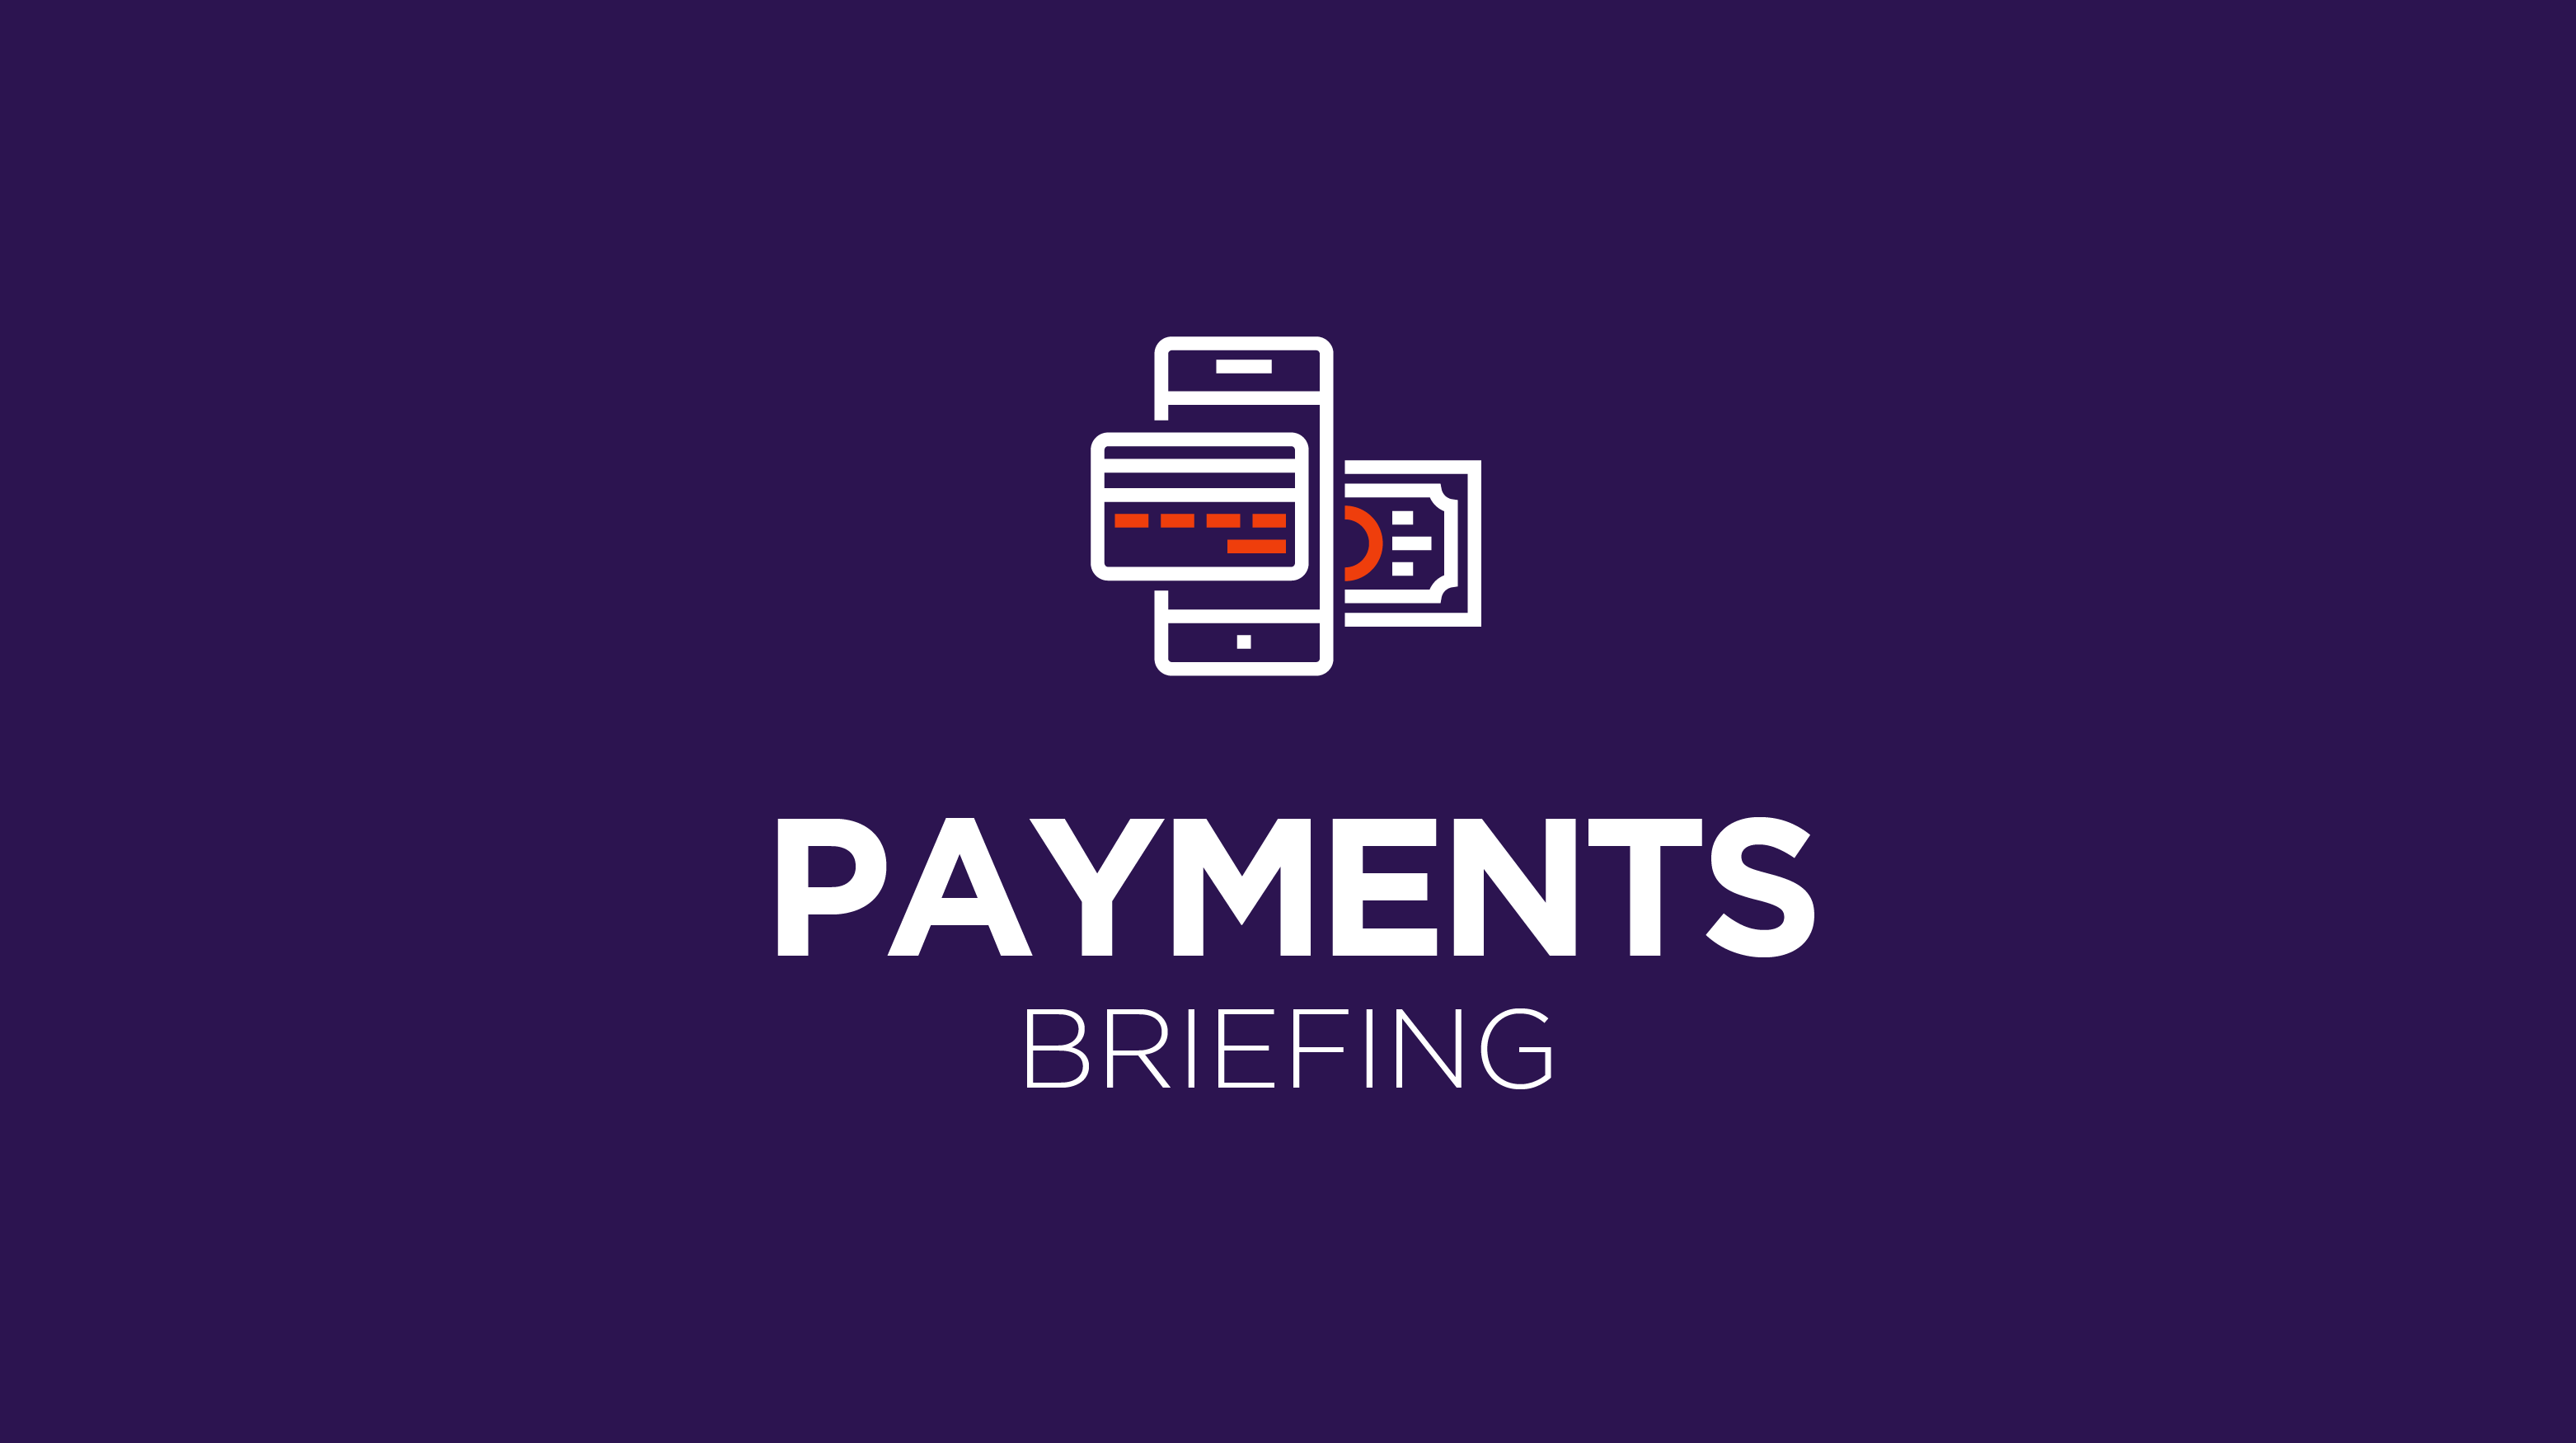 Payments Briefing: Meeting the growing demand for digital payments in the public sector￼